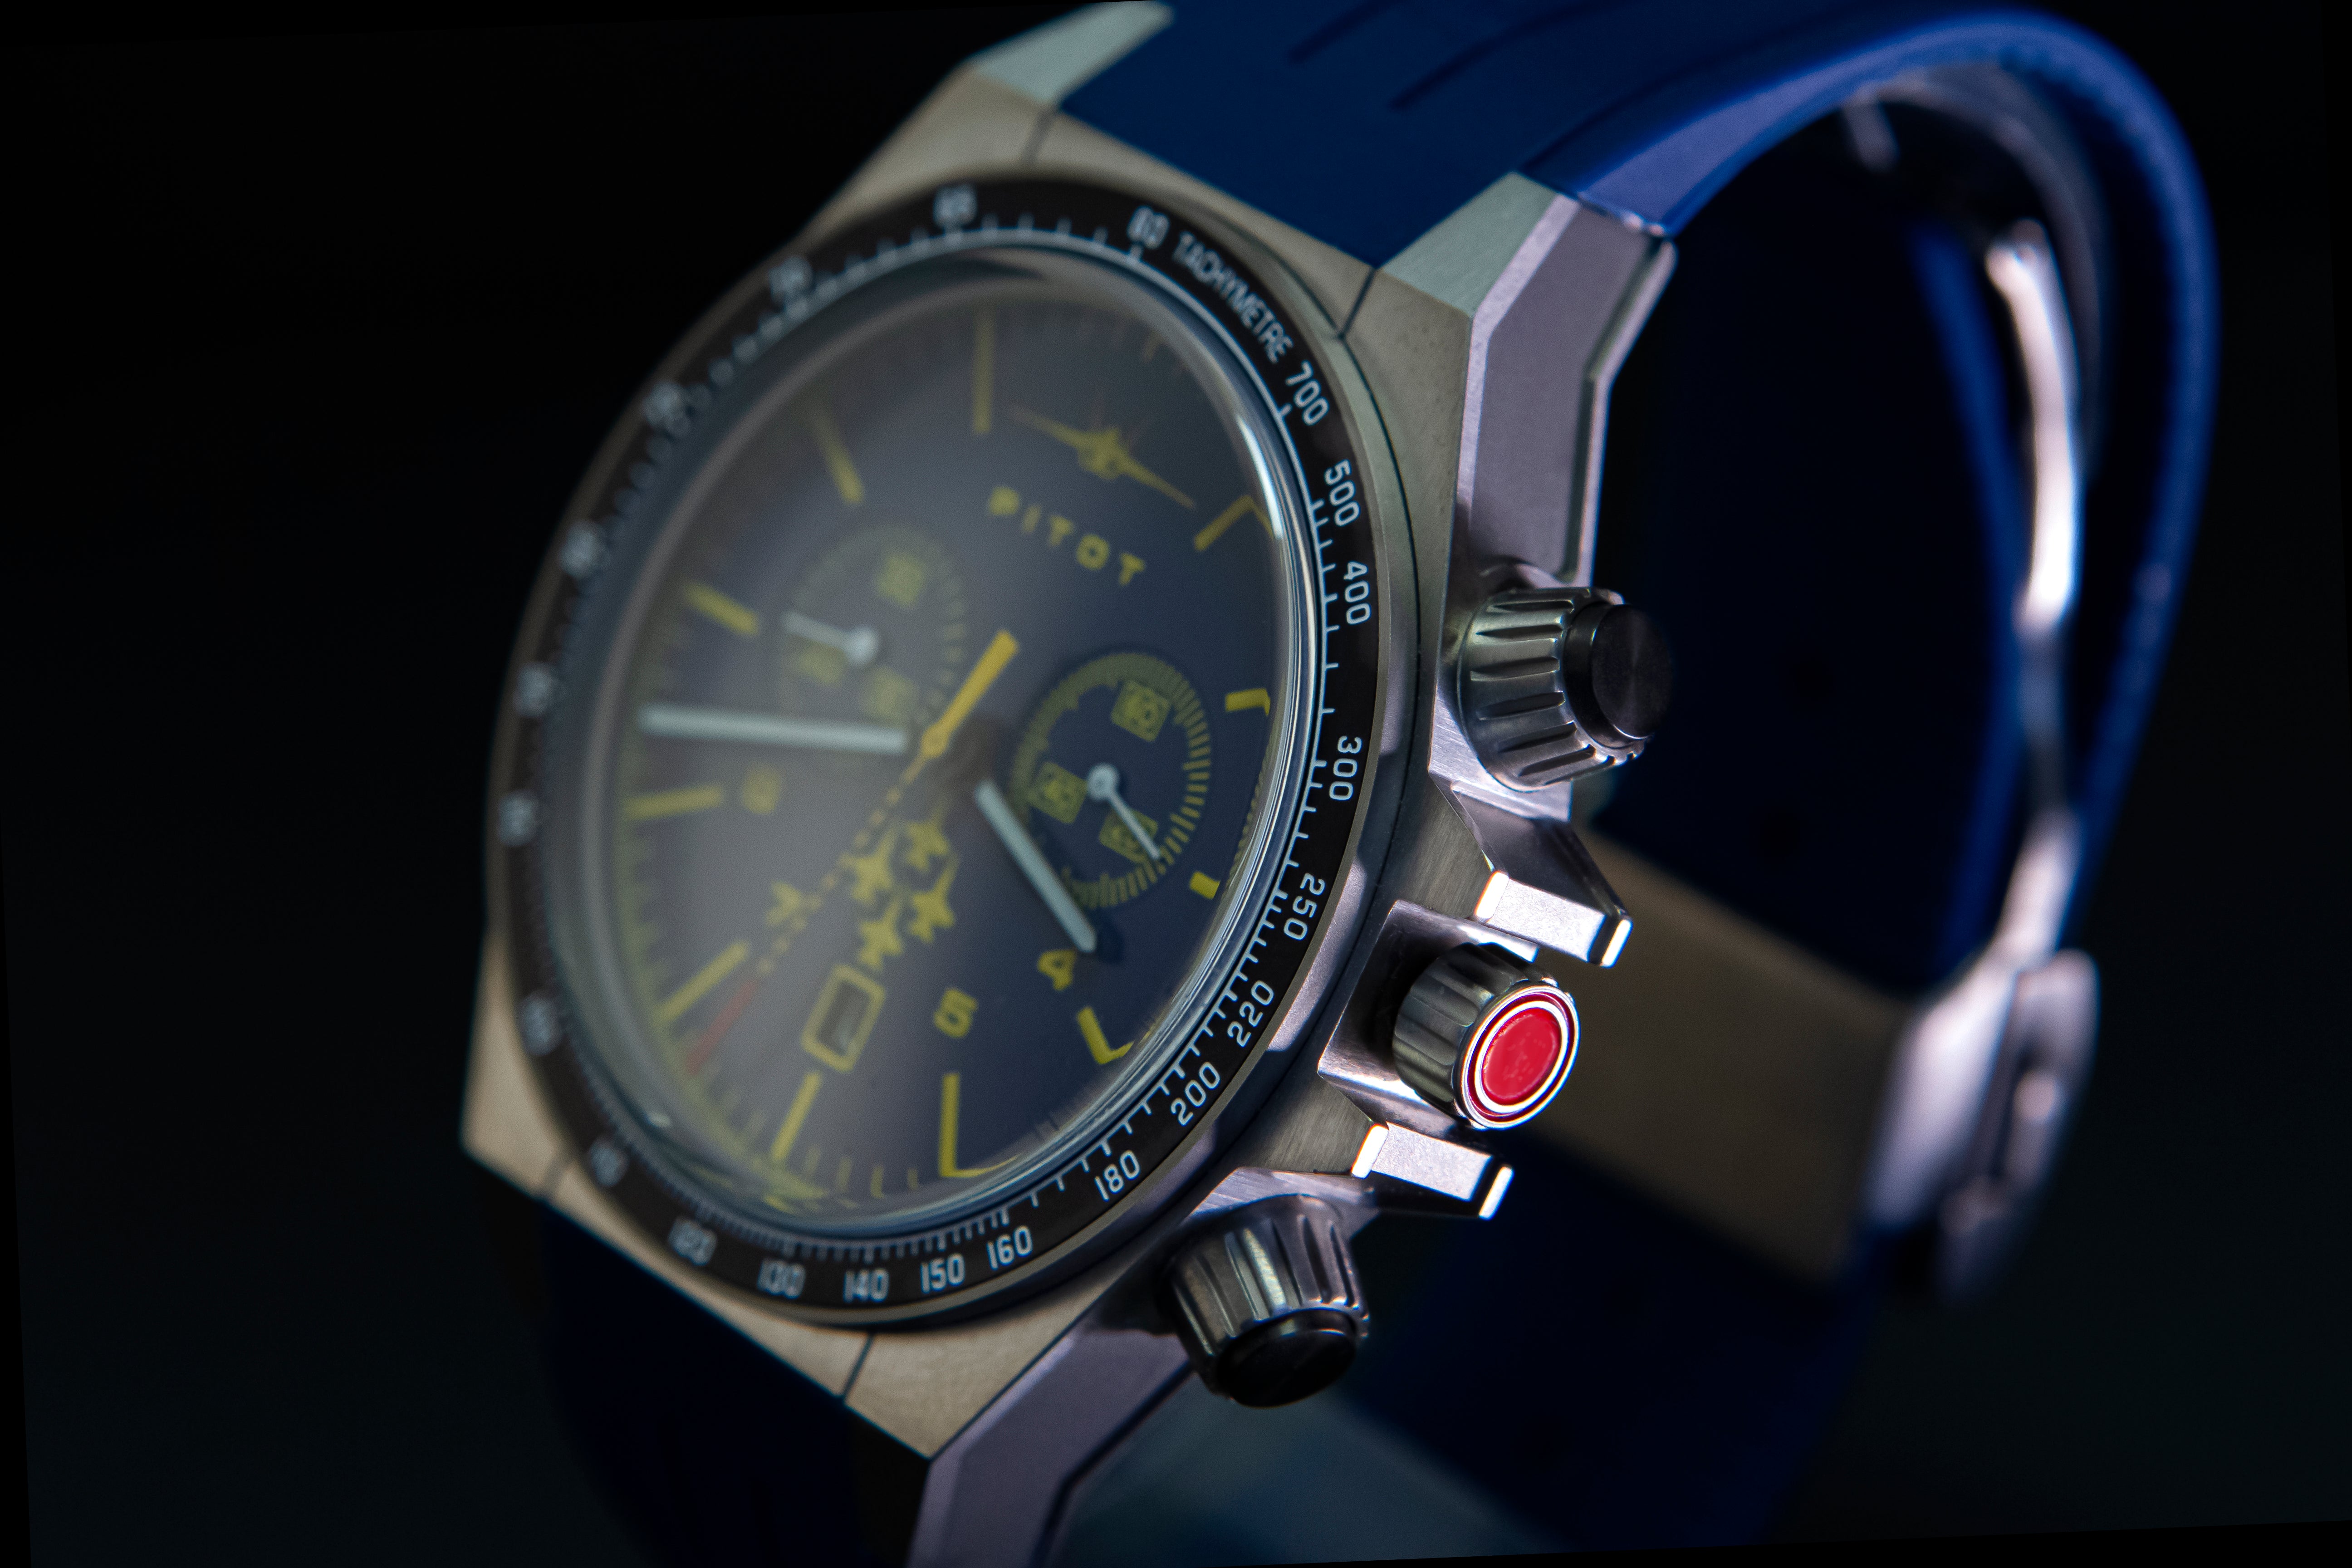 FINAL Day For The Aviator Watches on Kickstarter